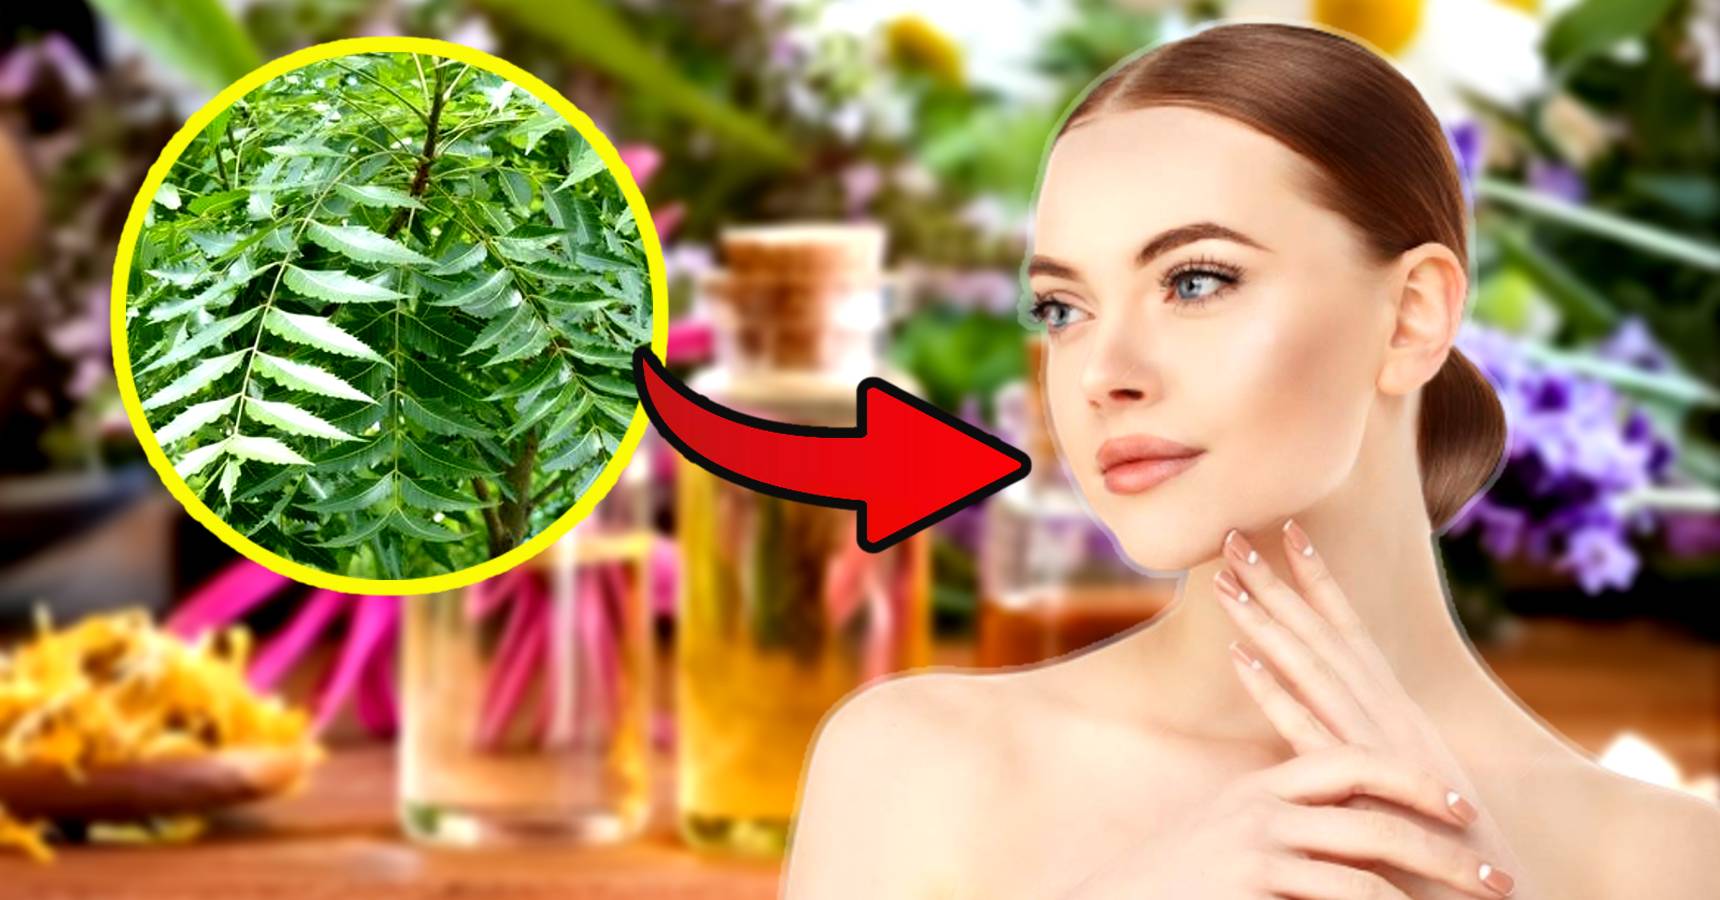 Skin care tips use neem oil to get clear healthy and glowing skin